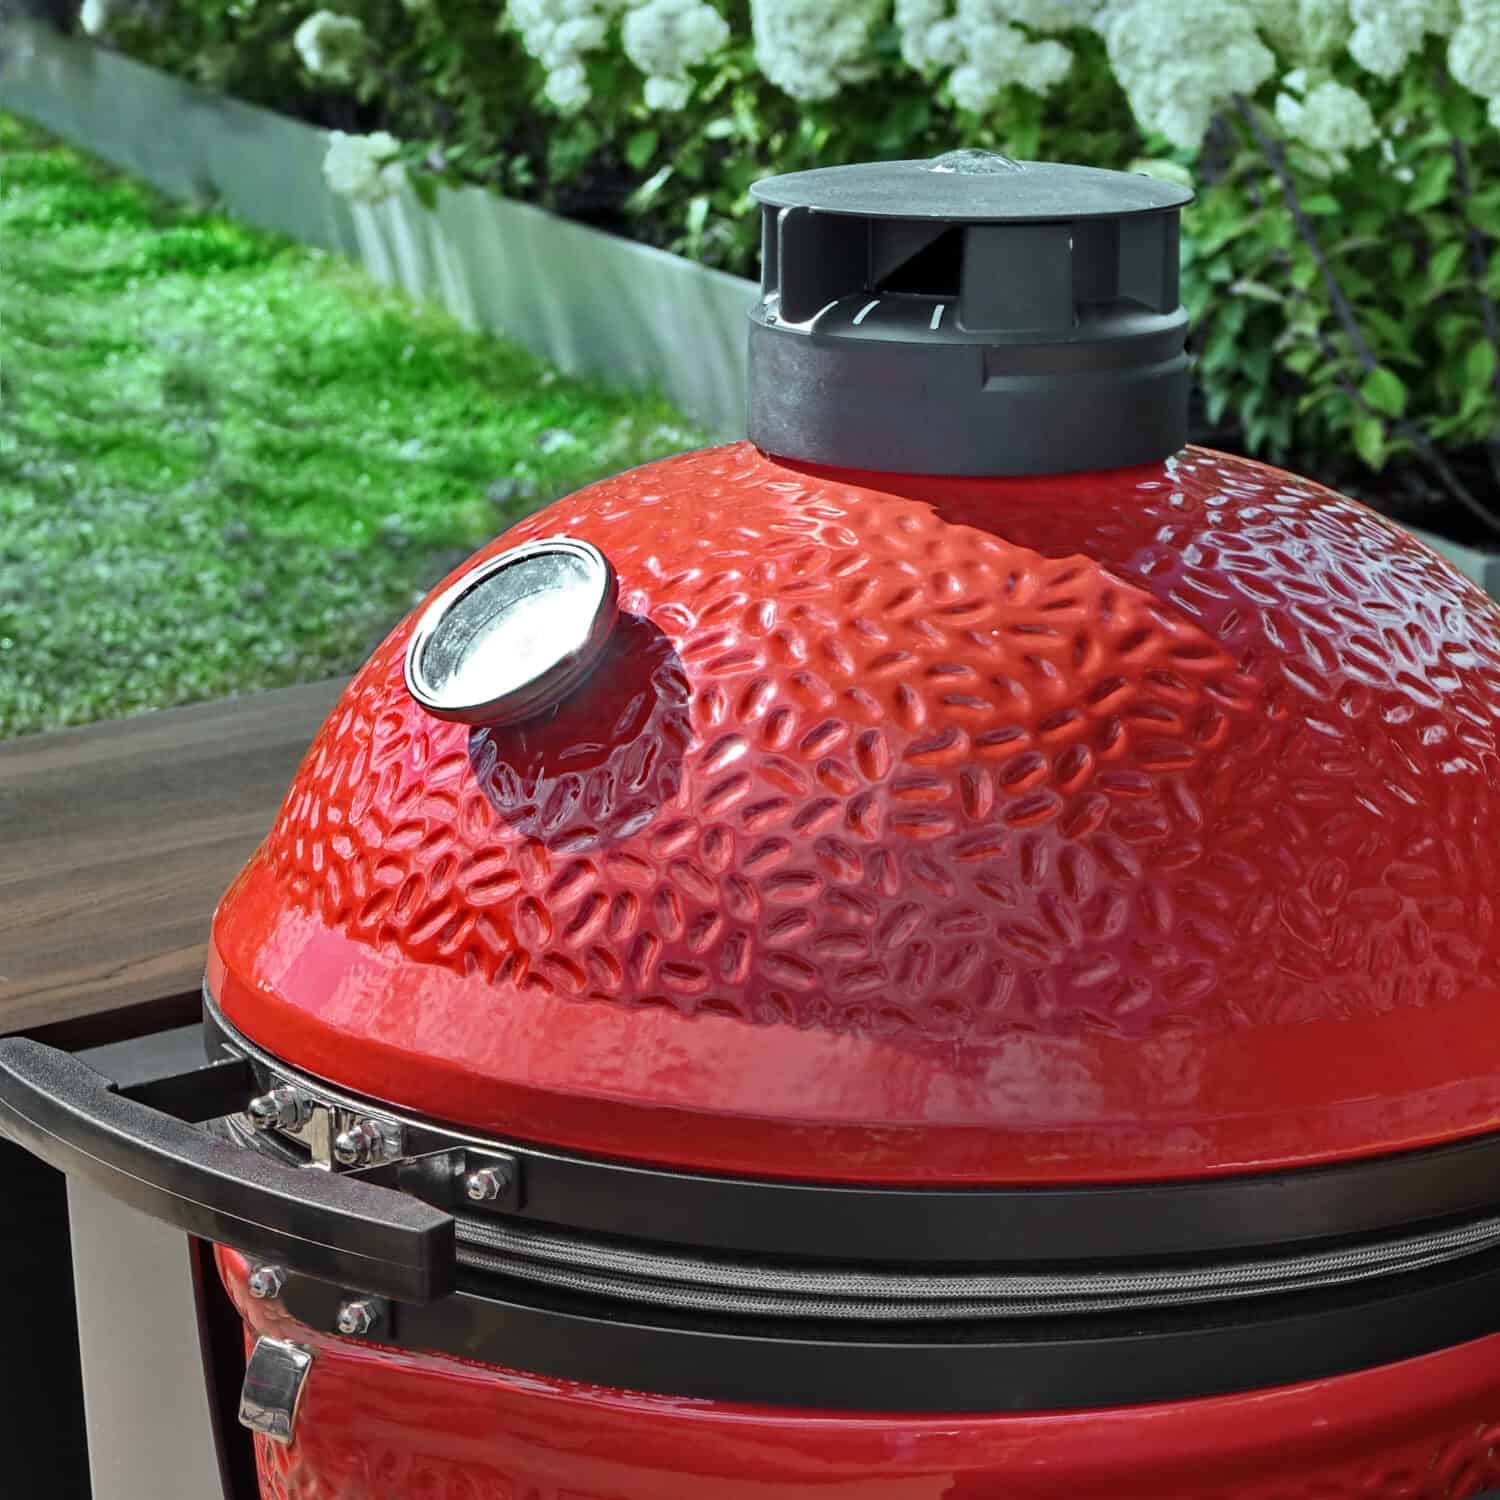 Big Ceramic Green Egg BBQ Grill. Kamado Barbecue Charcoal Grill For Cookout Food. Ceramic Barbeque Grill And Smoker On The Backyard Lawn Or Restaurant Outdoor Terrace.